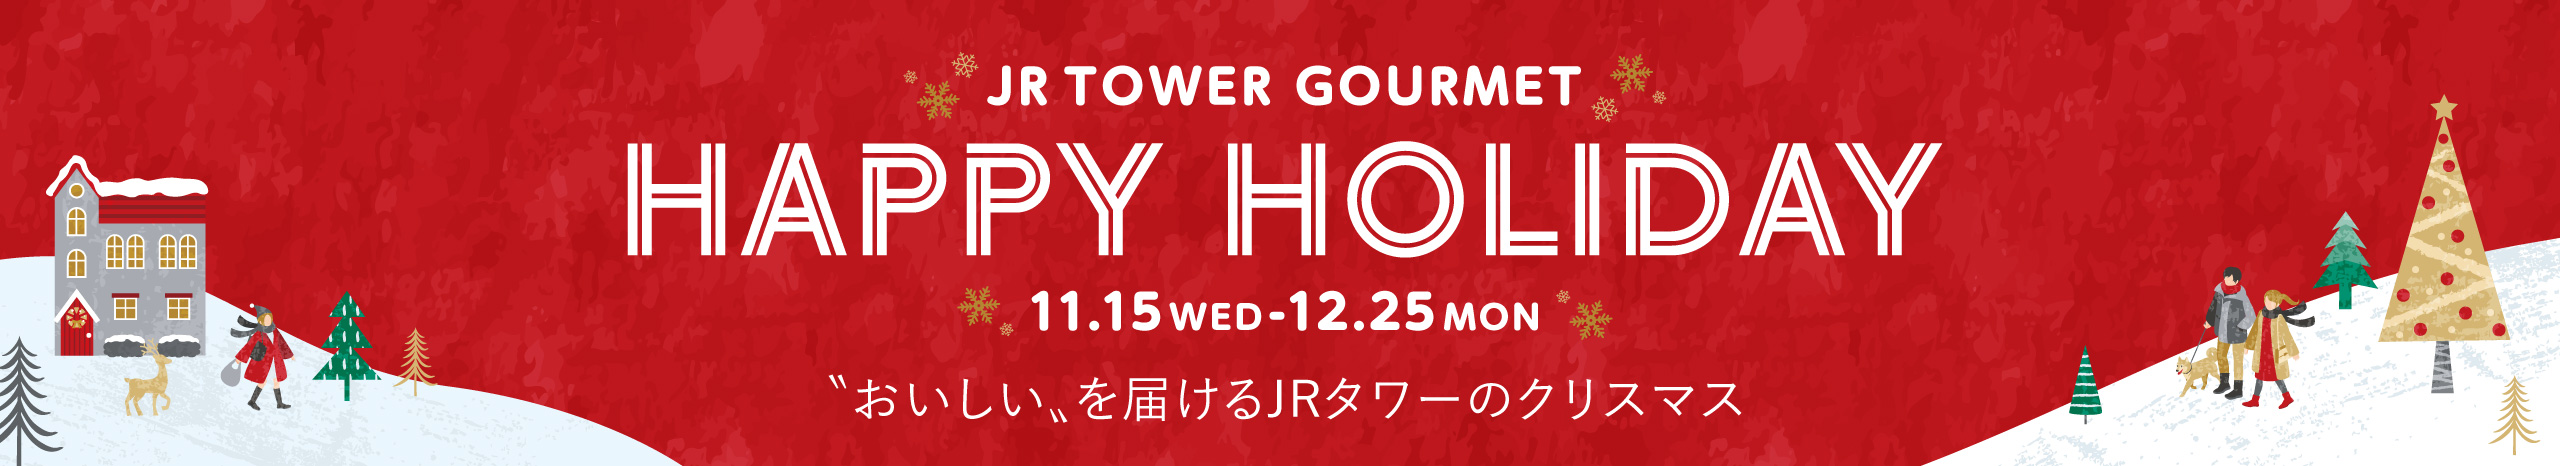 JR TOWER  GOURMET HAPPY  HOLIDAY